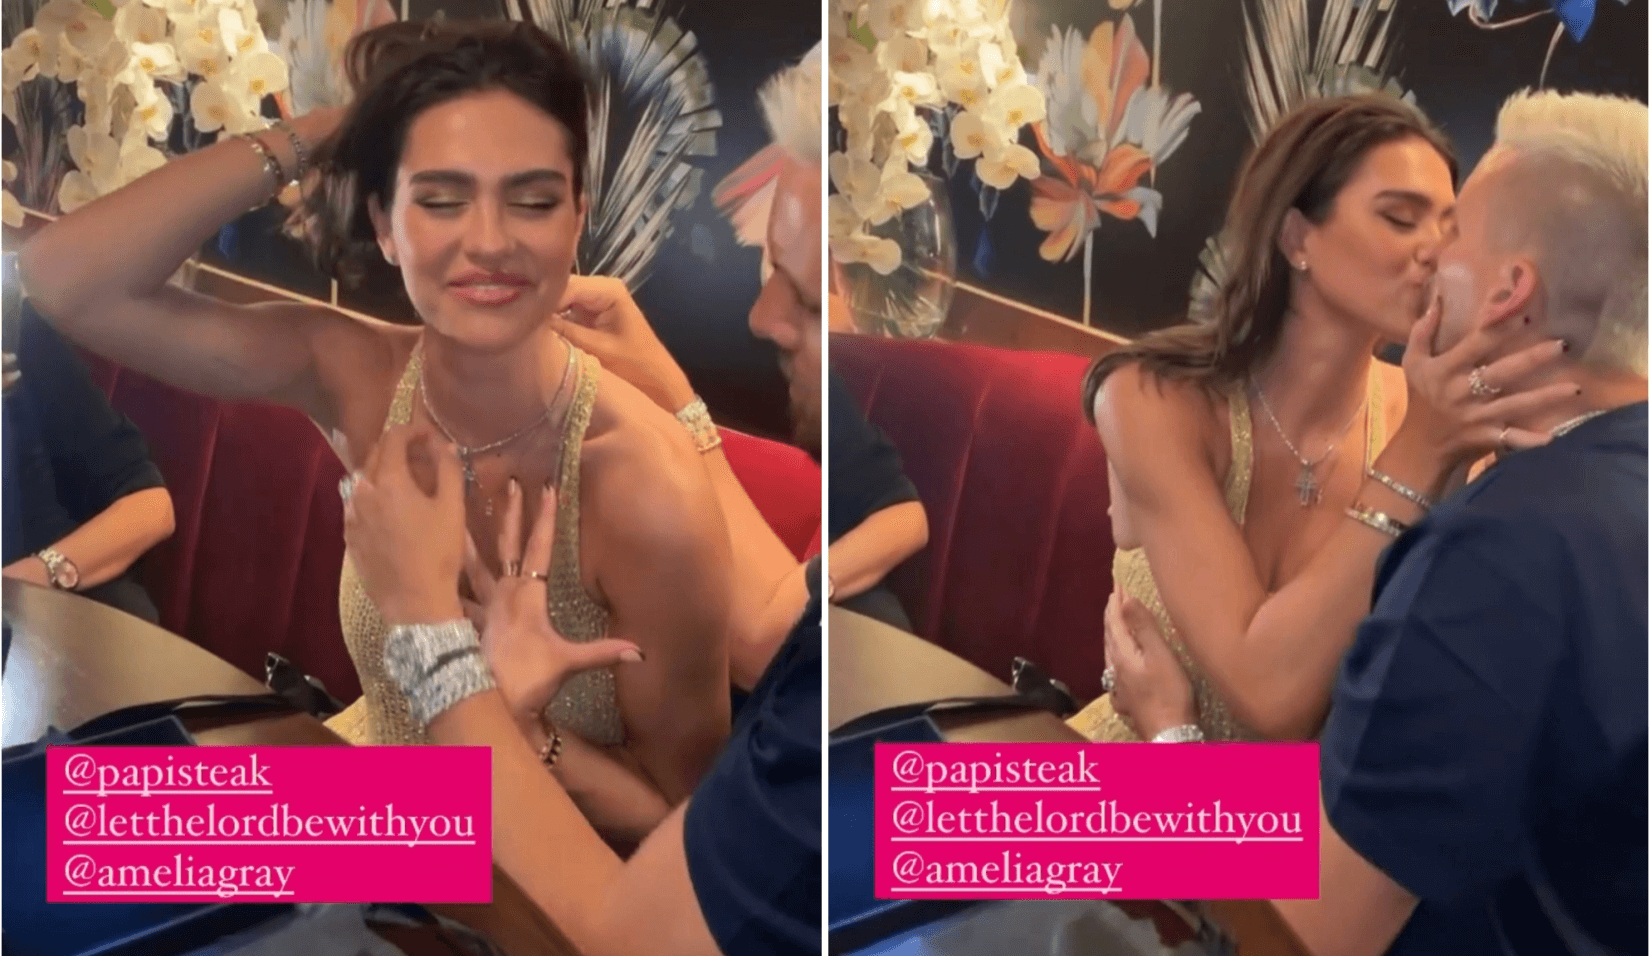 Scott Disick Gifts Girlfriend Amelia Hamlin Icy Necklace For Her 20th Birthday!